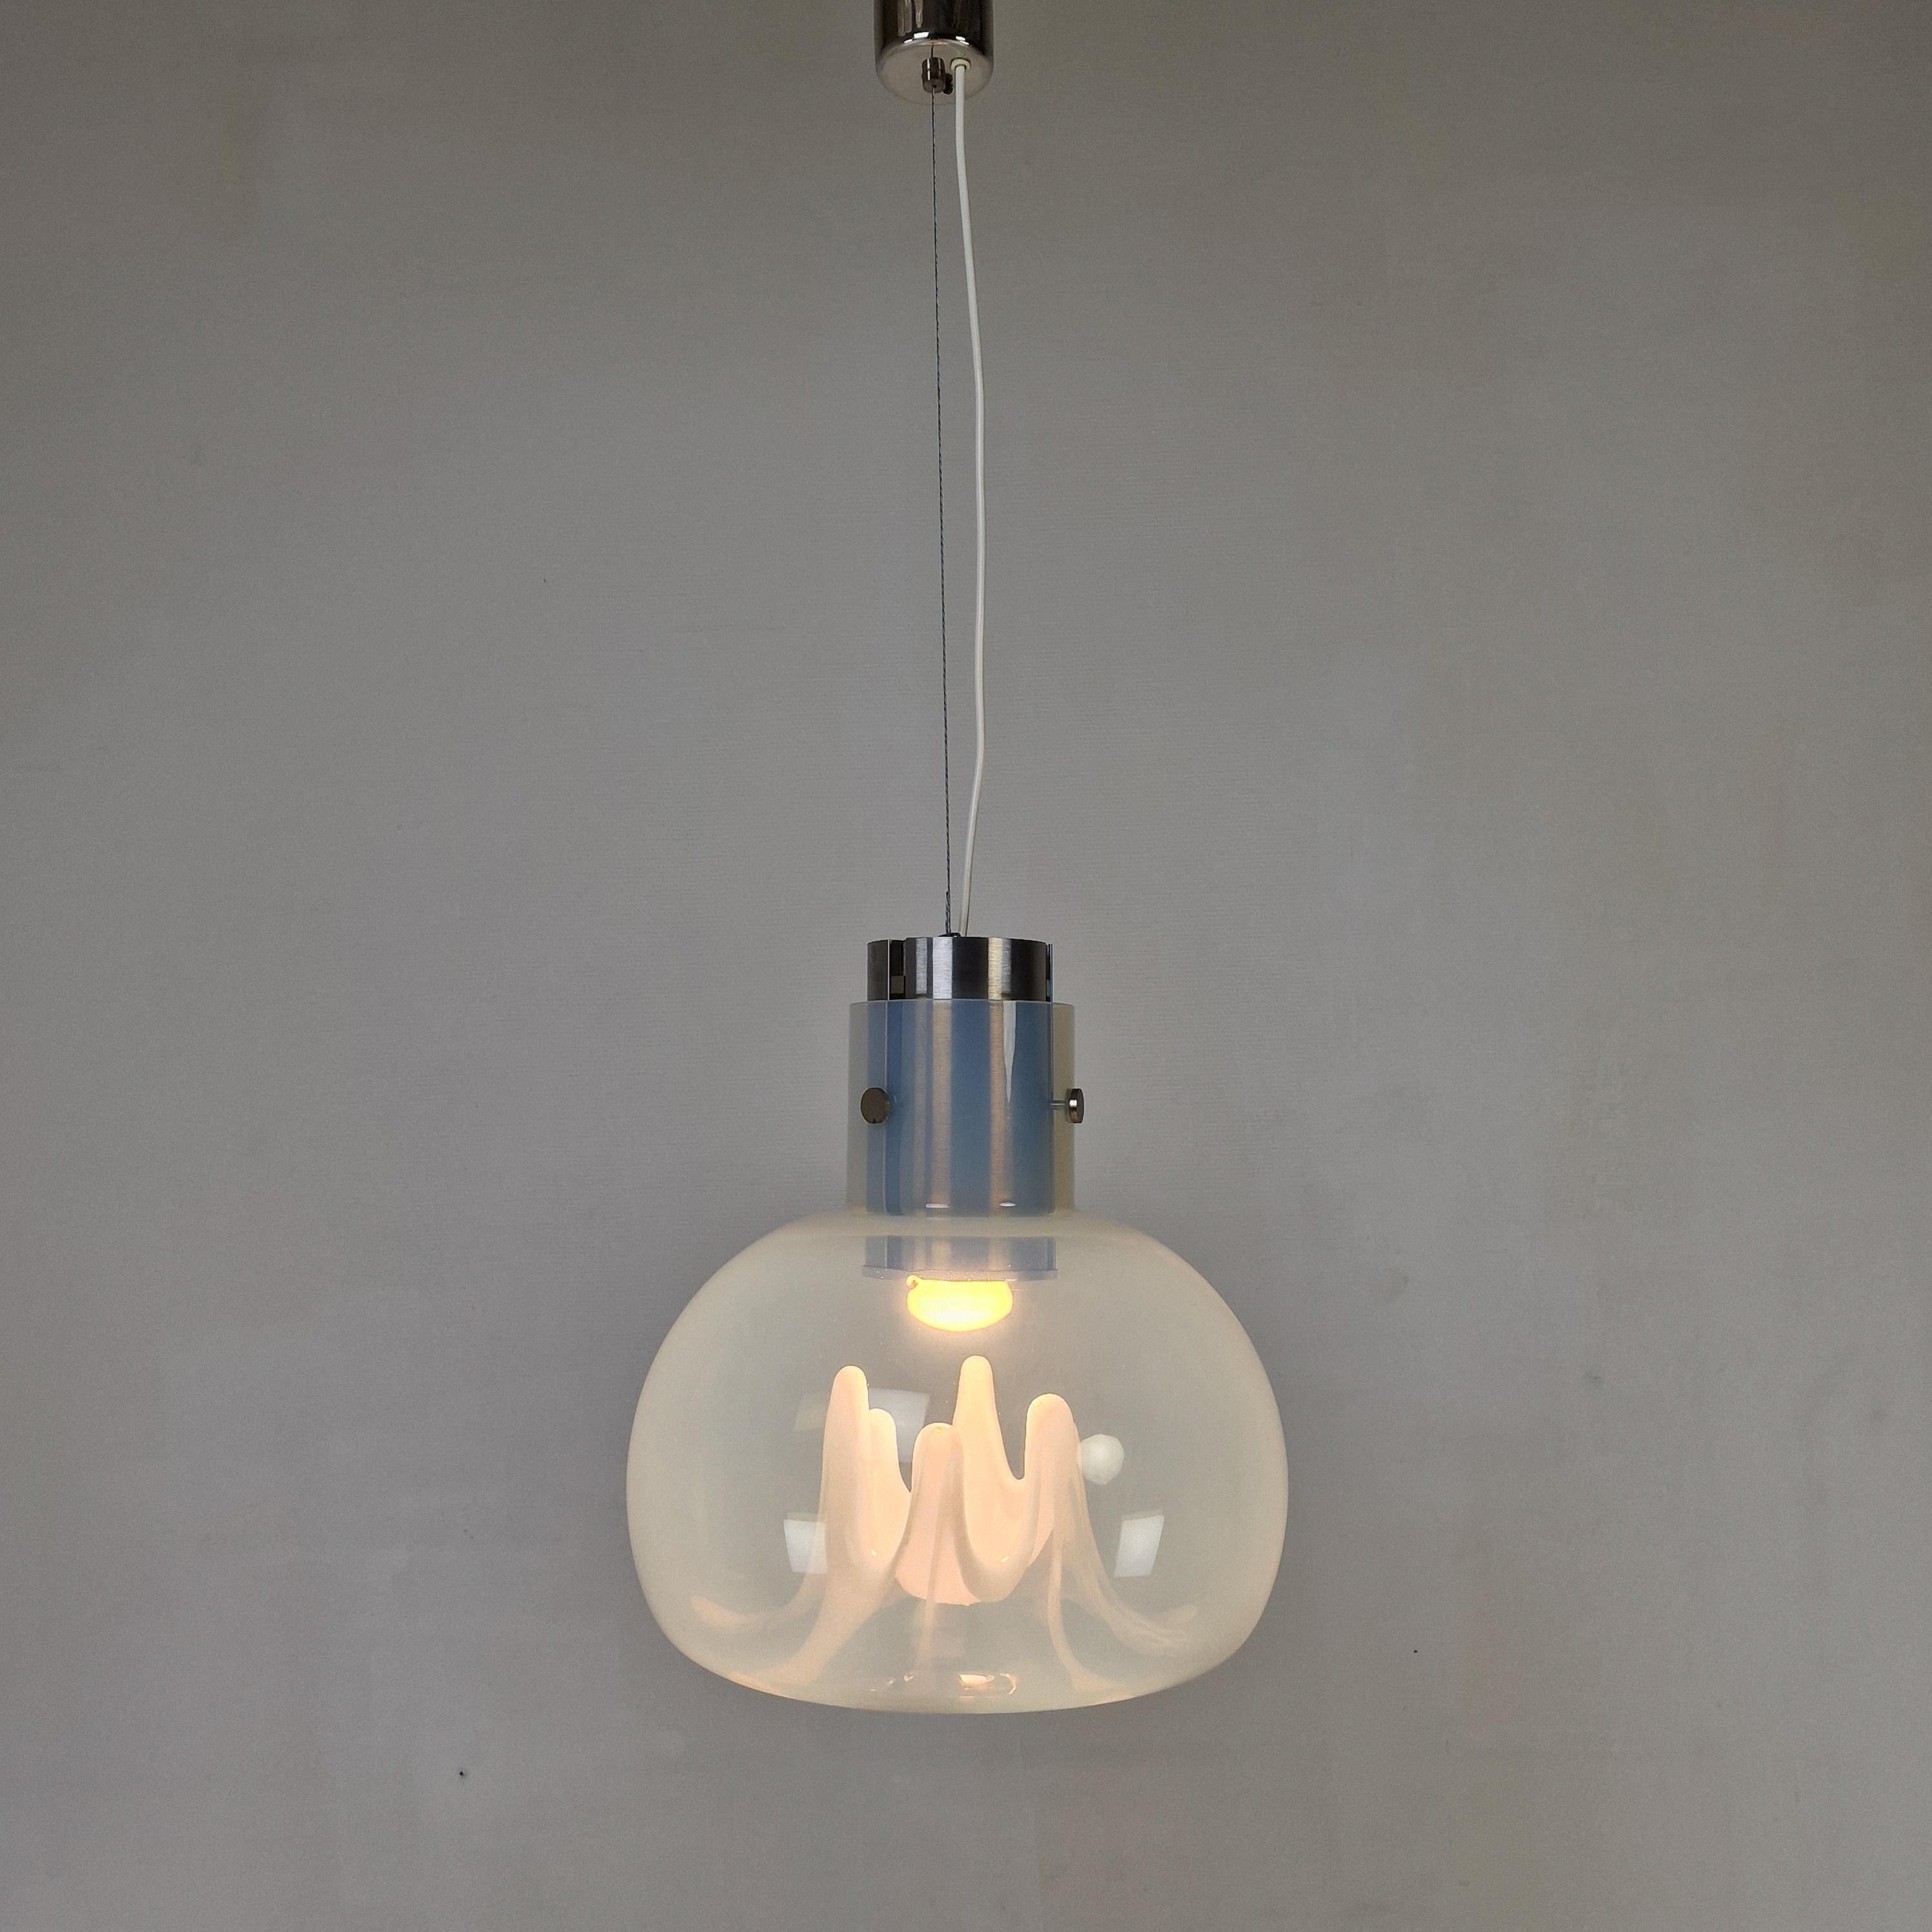 Stunning and rare Italian pendant designed by Toni Zuccheri and produced by VeArt in the 1970s.
Beautiful hand blown Murano glass bulb in white and transparent.

The design of this piece consists of milky colored drops that are lightened up from